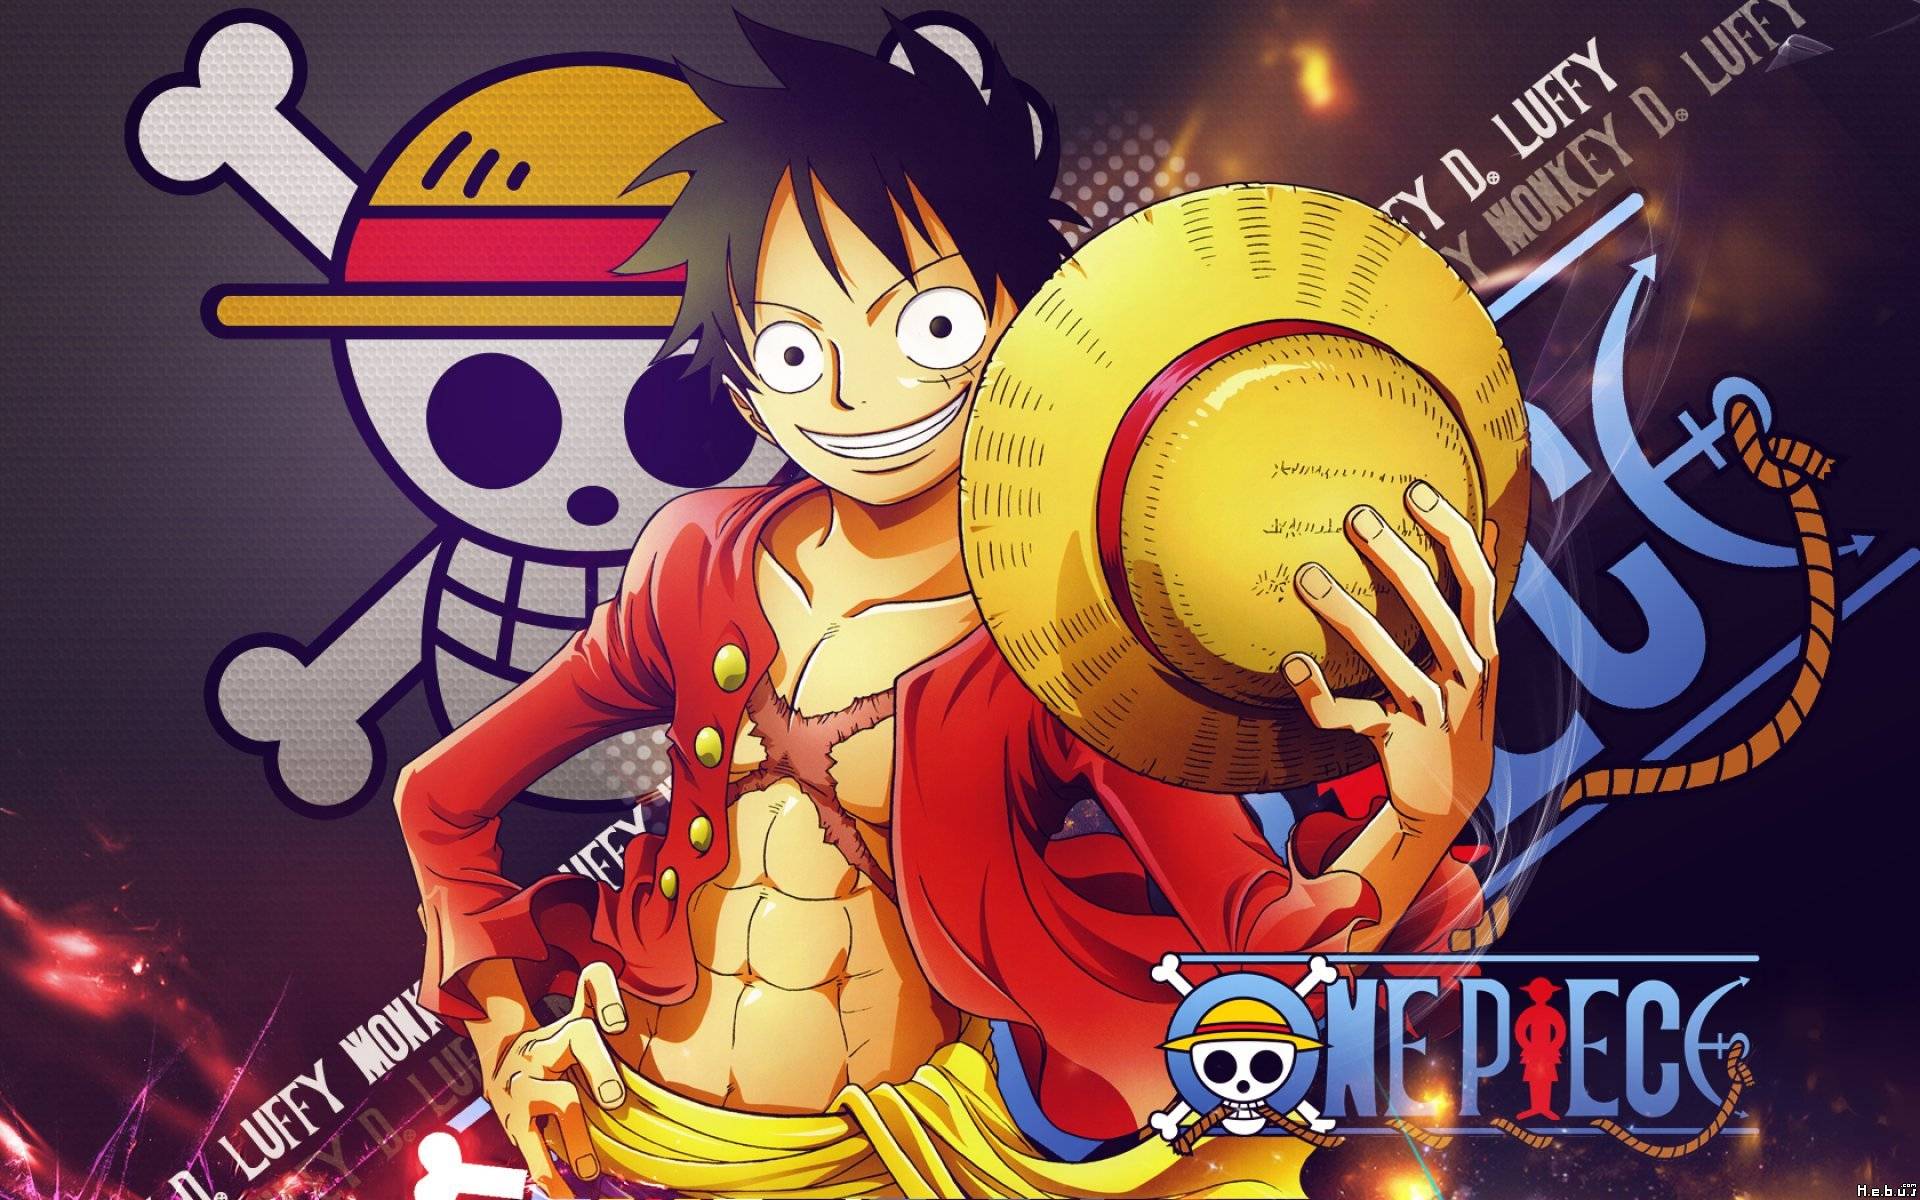 stuffpoint one piece images wallpapers luffy new world hd tweet